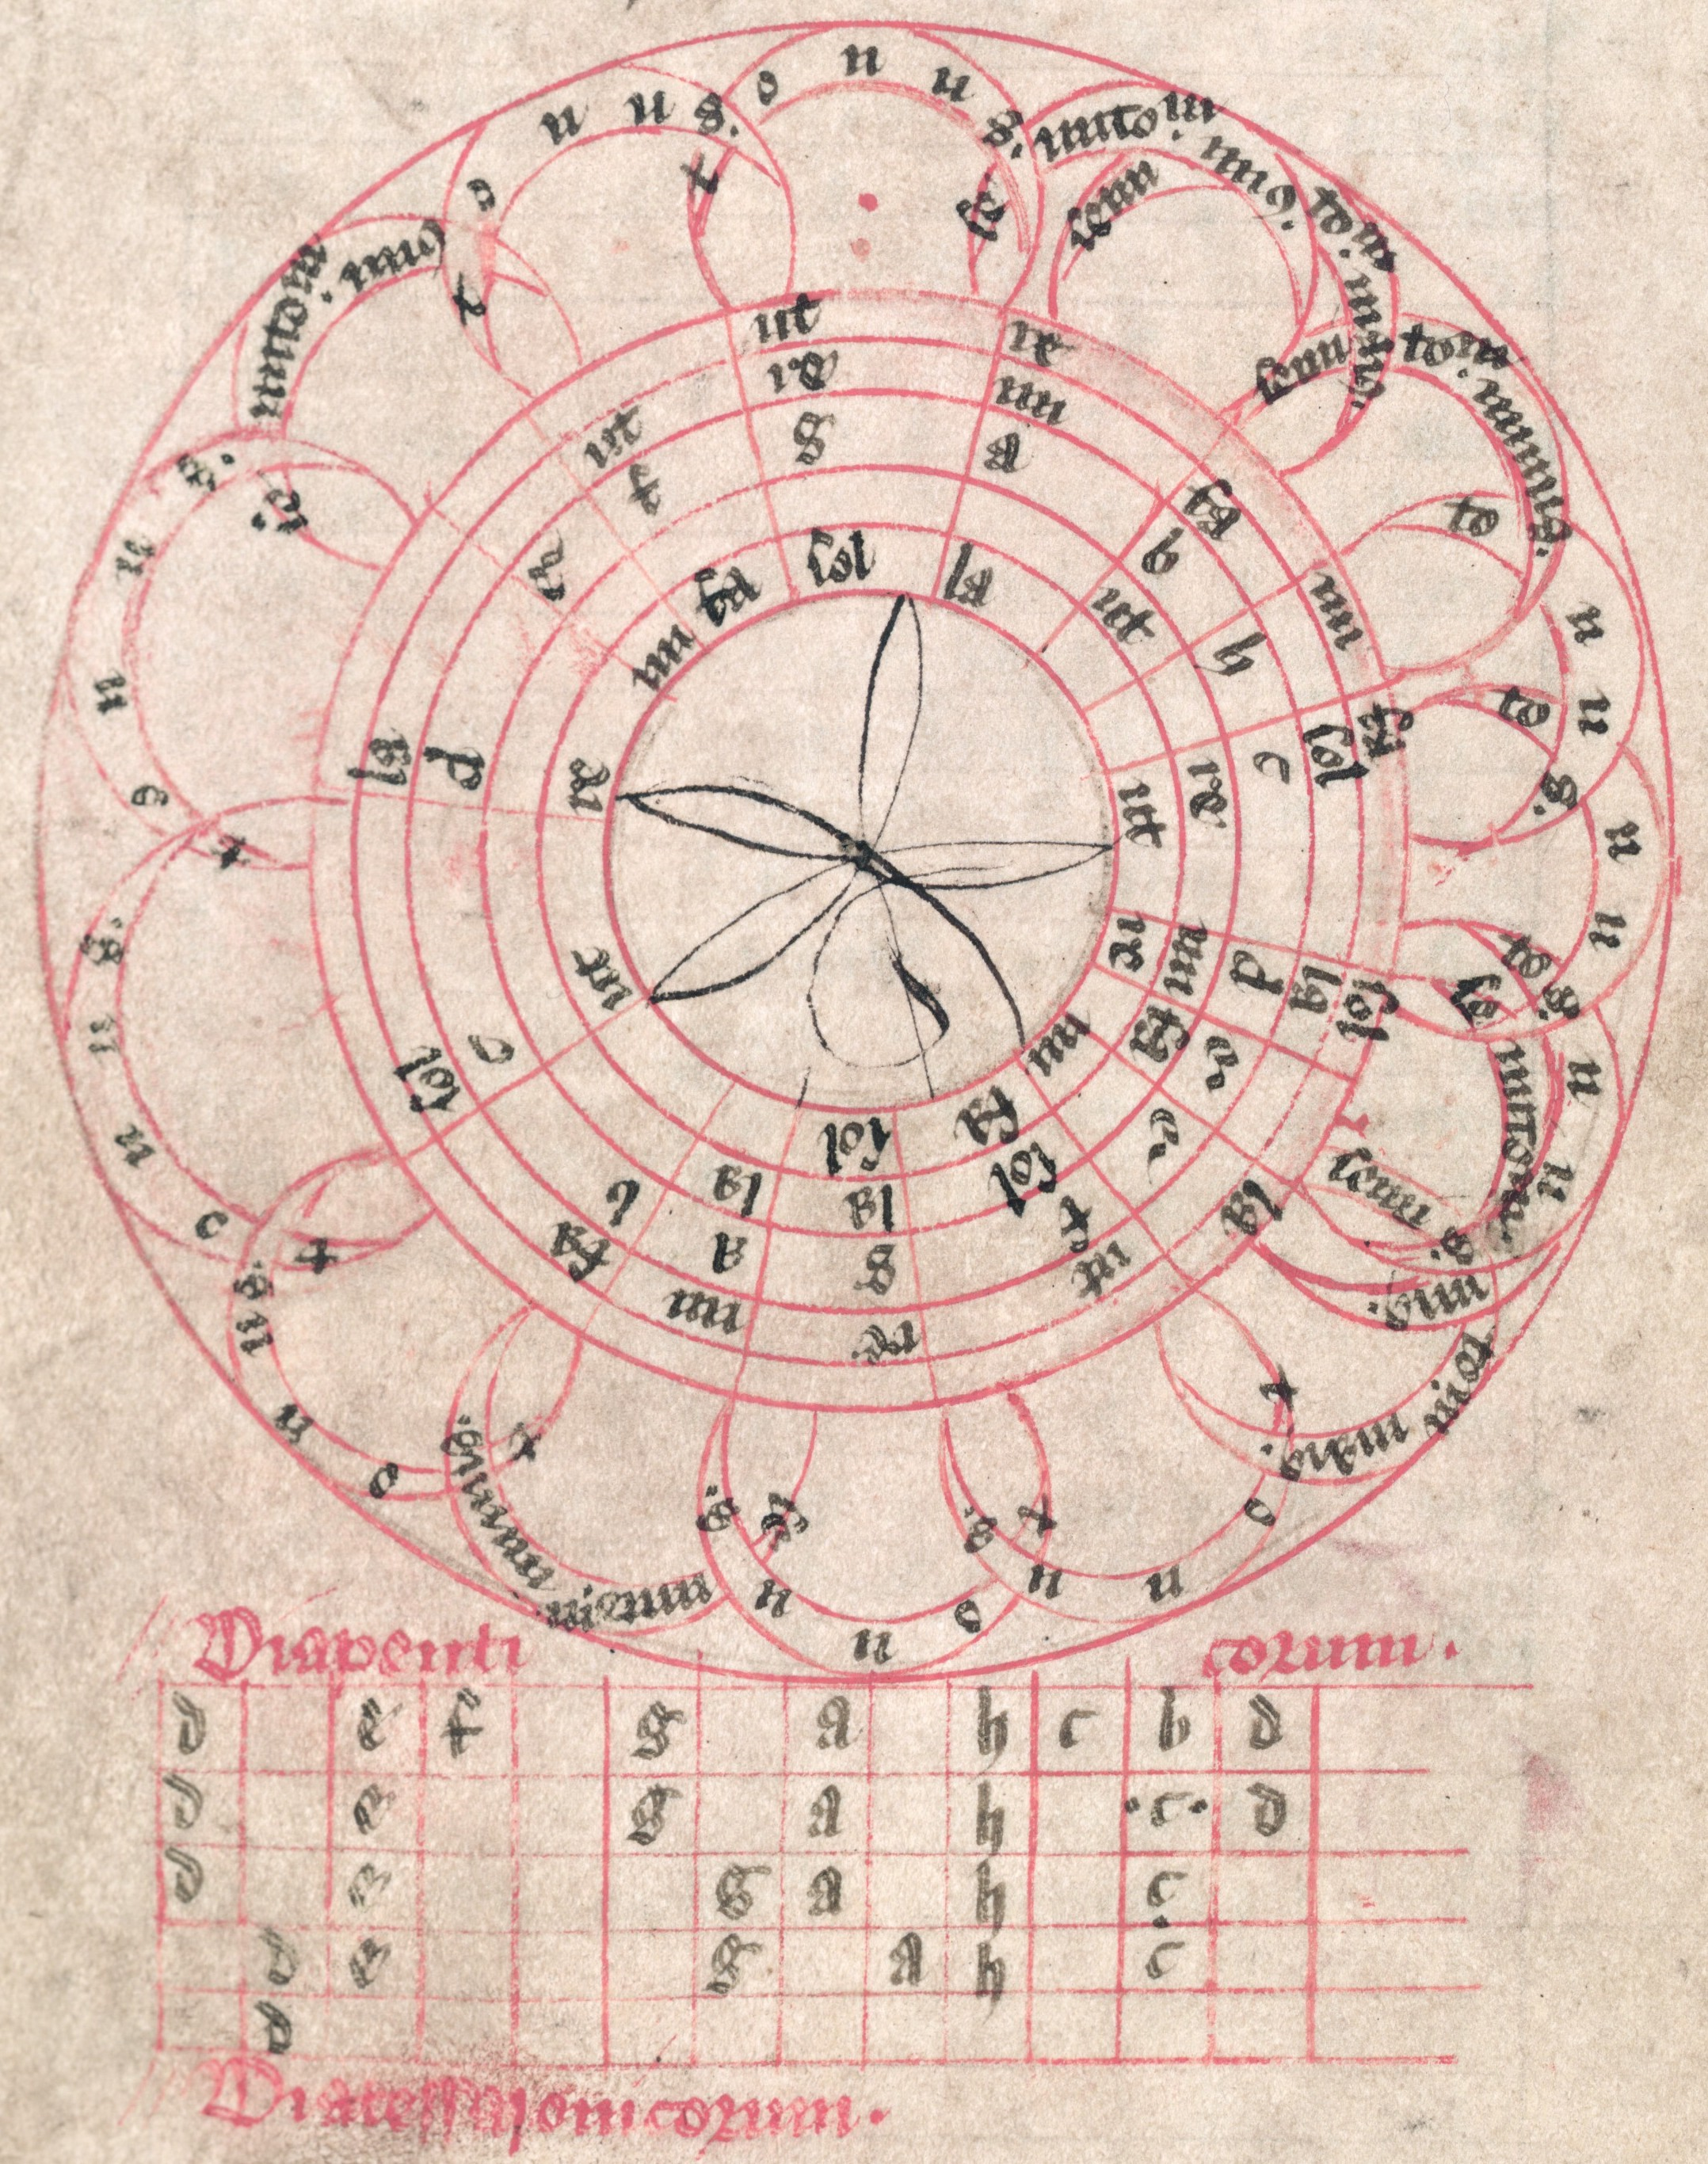 Theinred of Dover's hexachords on a two-octave circle. More description below.